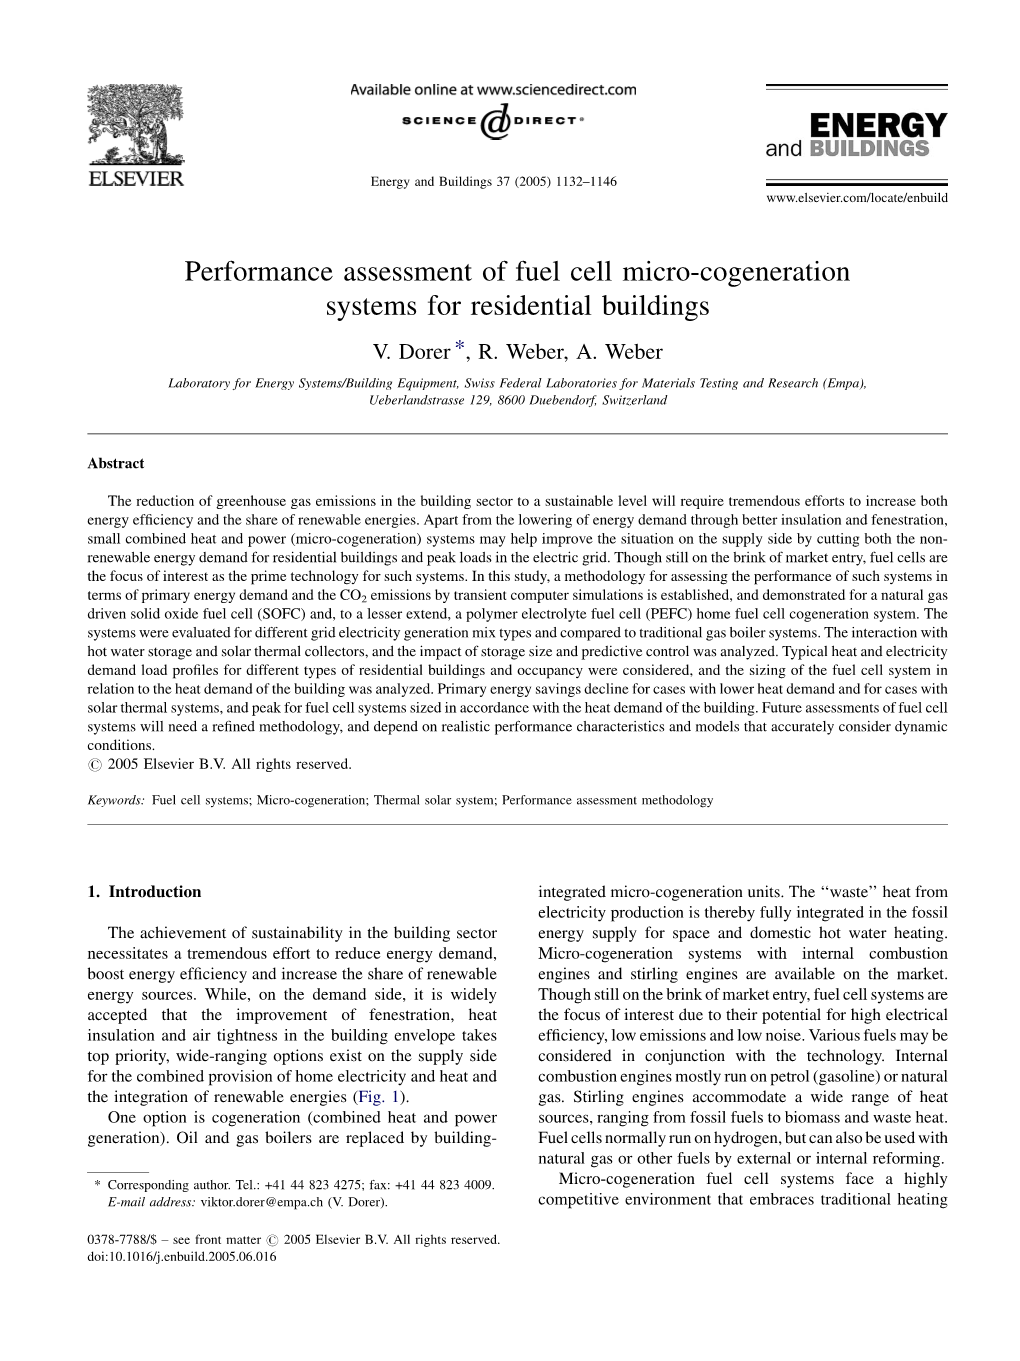 Performance Assessment of Fuel Cell Micro-Cogeneration Systems for Residential Buildings V